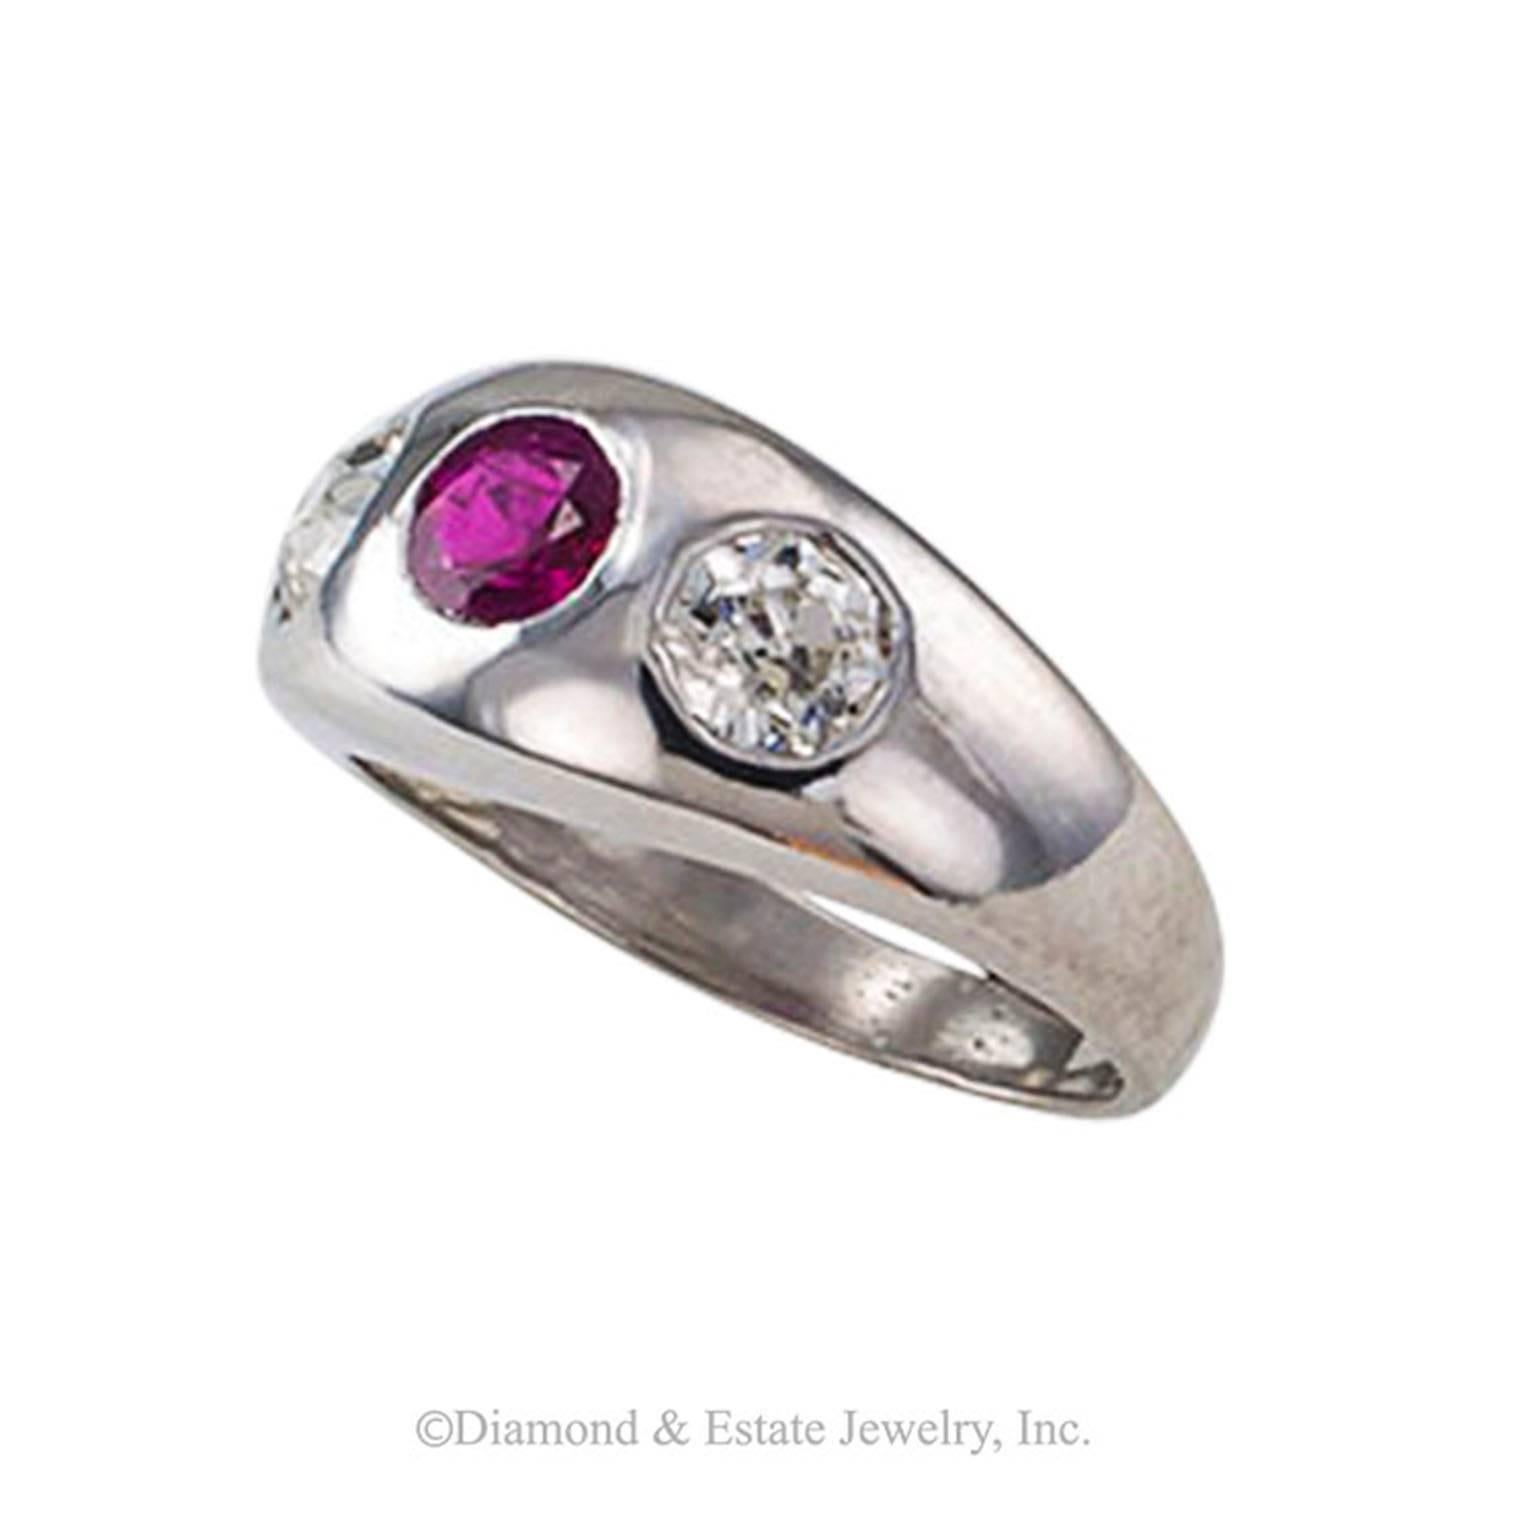 1910 Ruby and Diamond Three-Stone Gypsy Ring

Gypsy rings are so intriguing, and yet, the design is the ultimate classic style.  This petite version comes in a size 4+ showcasing a very pleasing ruby between a pair of old European-cut diamonds